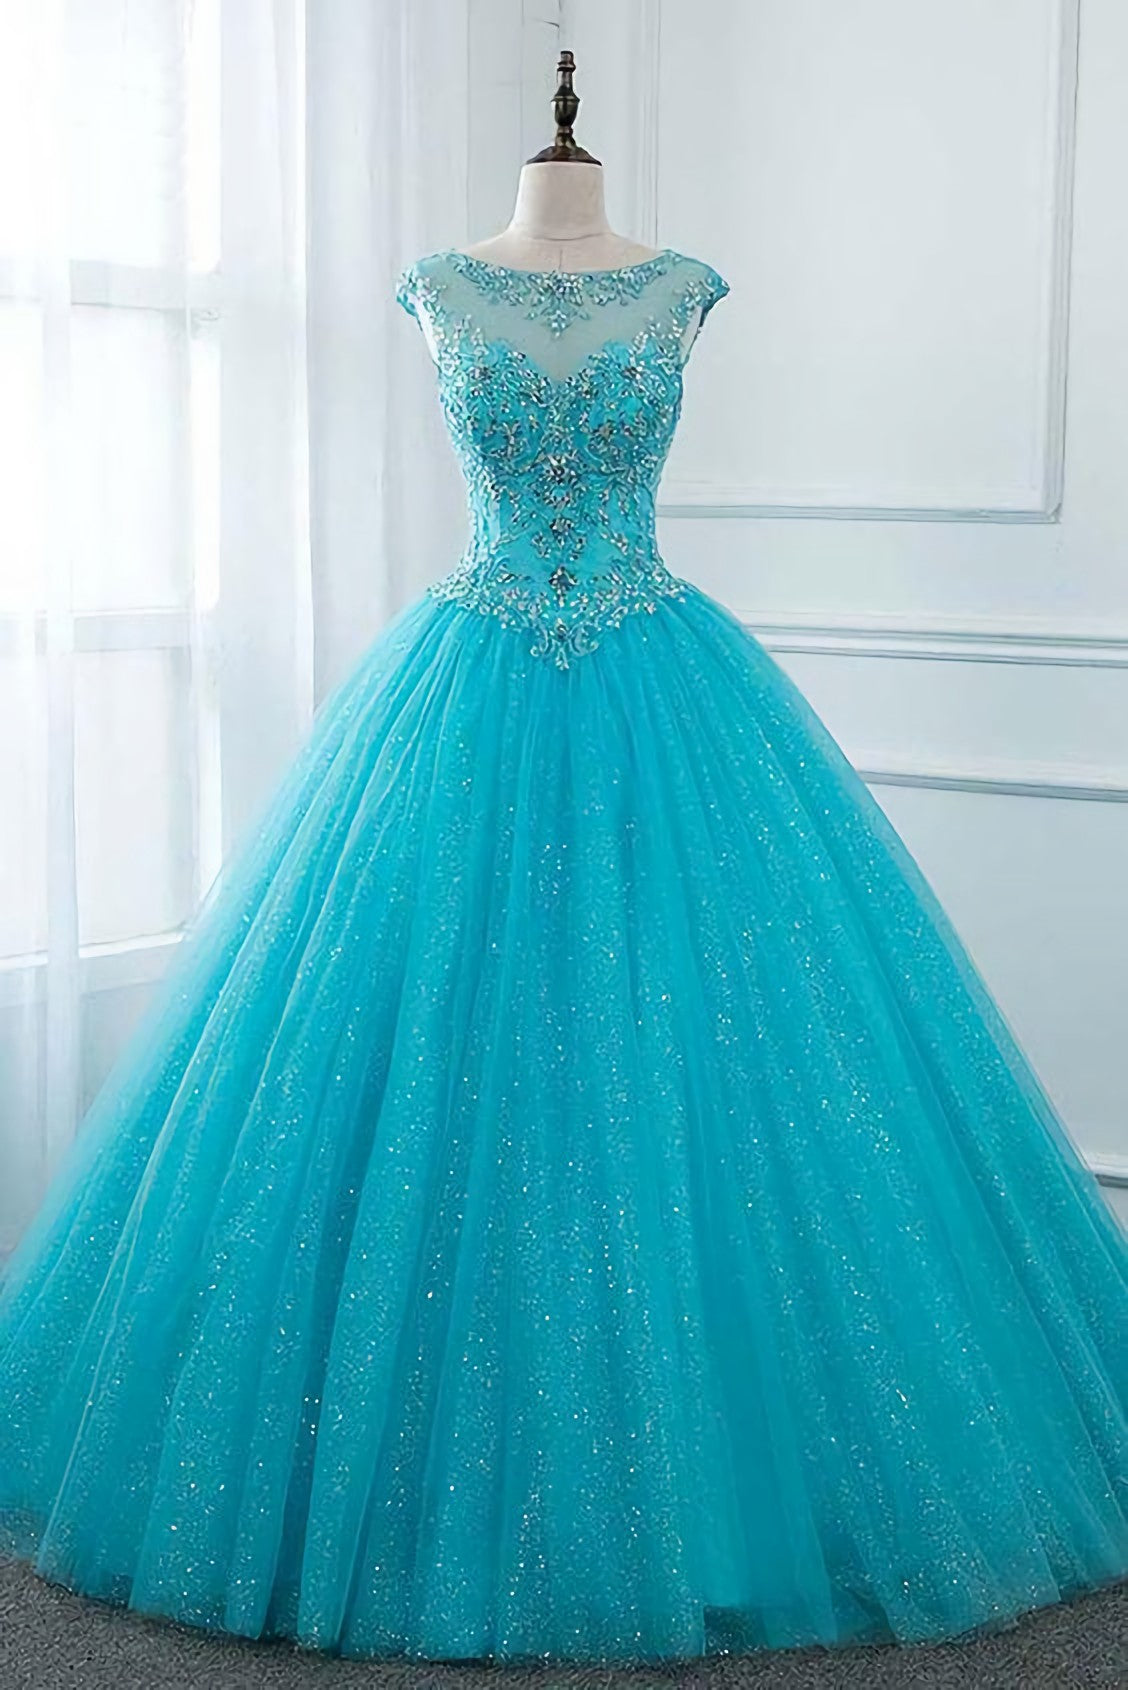 Party Dresses Glitter, Elegant Long Ball Gown Quinceanera Dresses, Beaded Corset Prom Gown